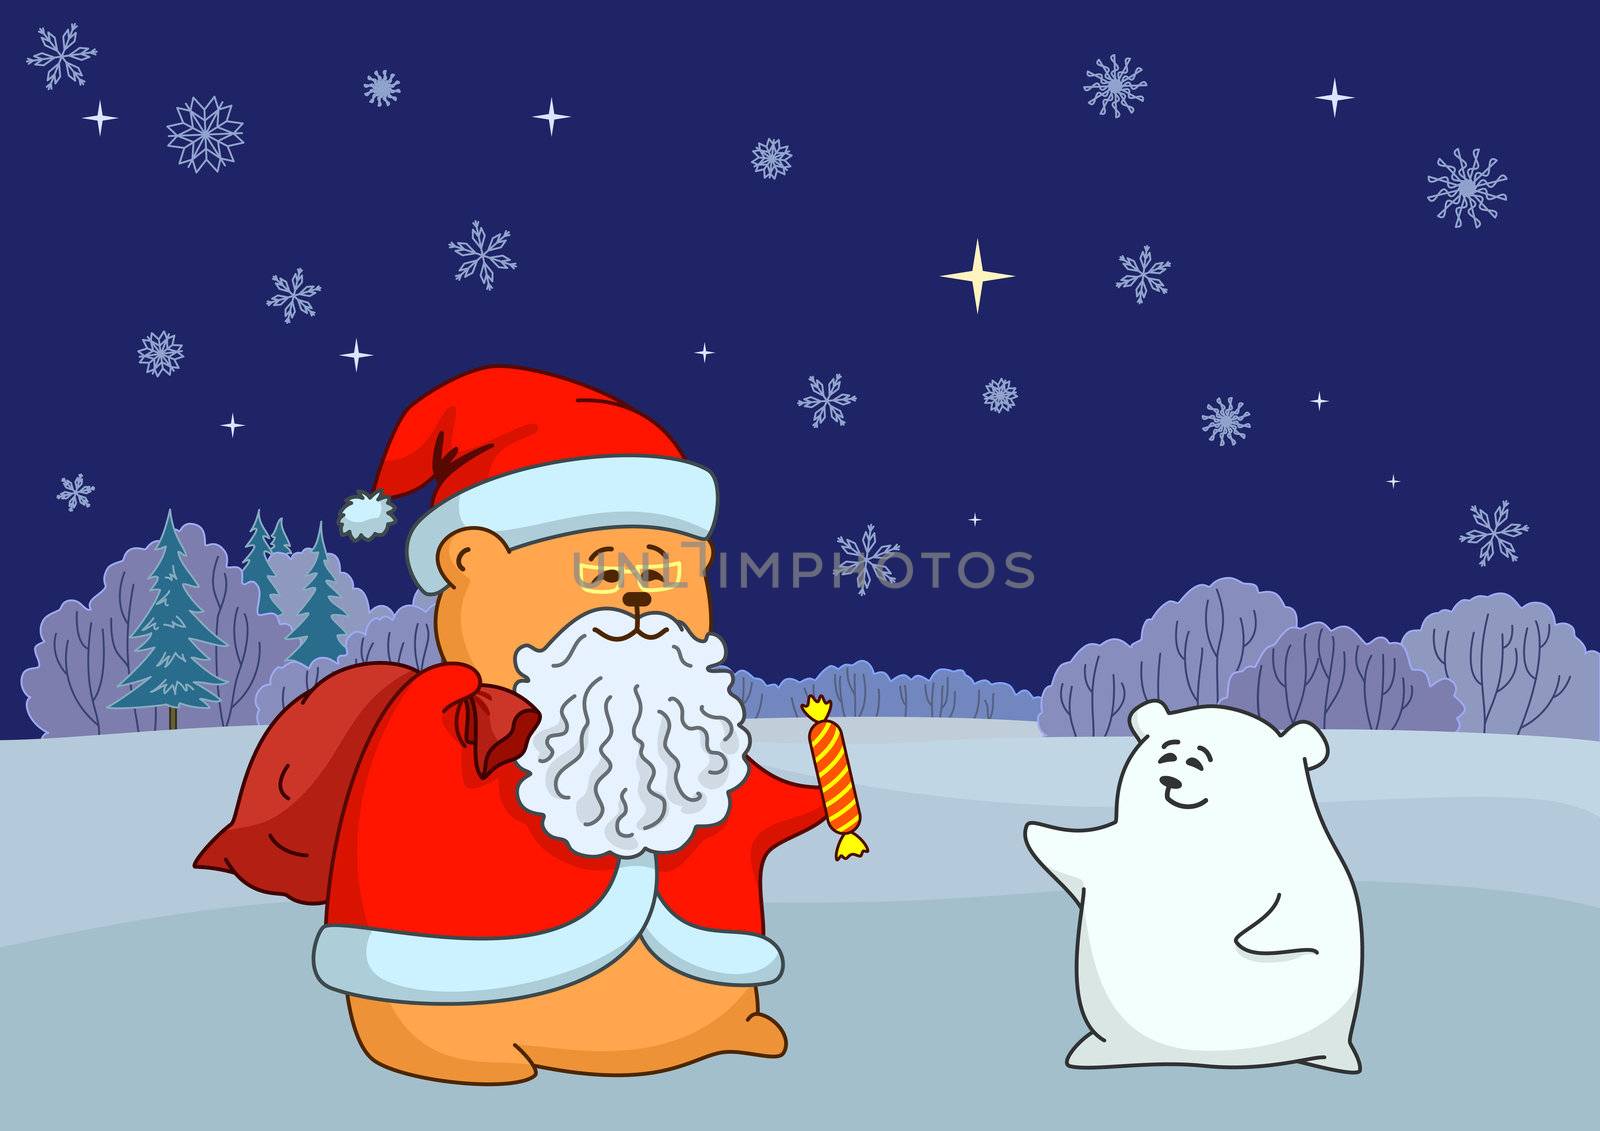 Toy Santa Claus and polar bear against night winter forest